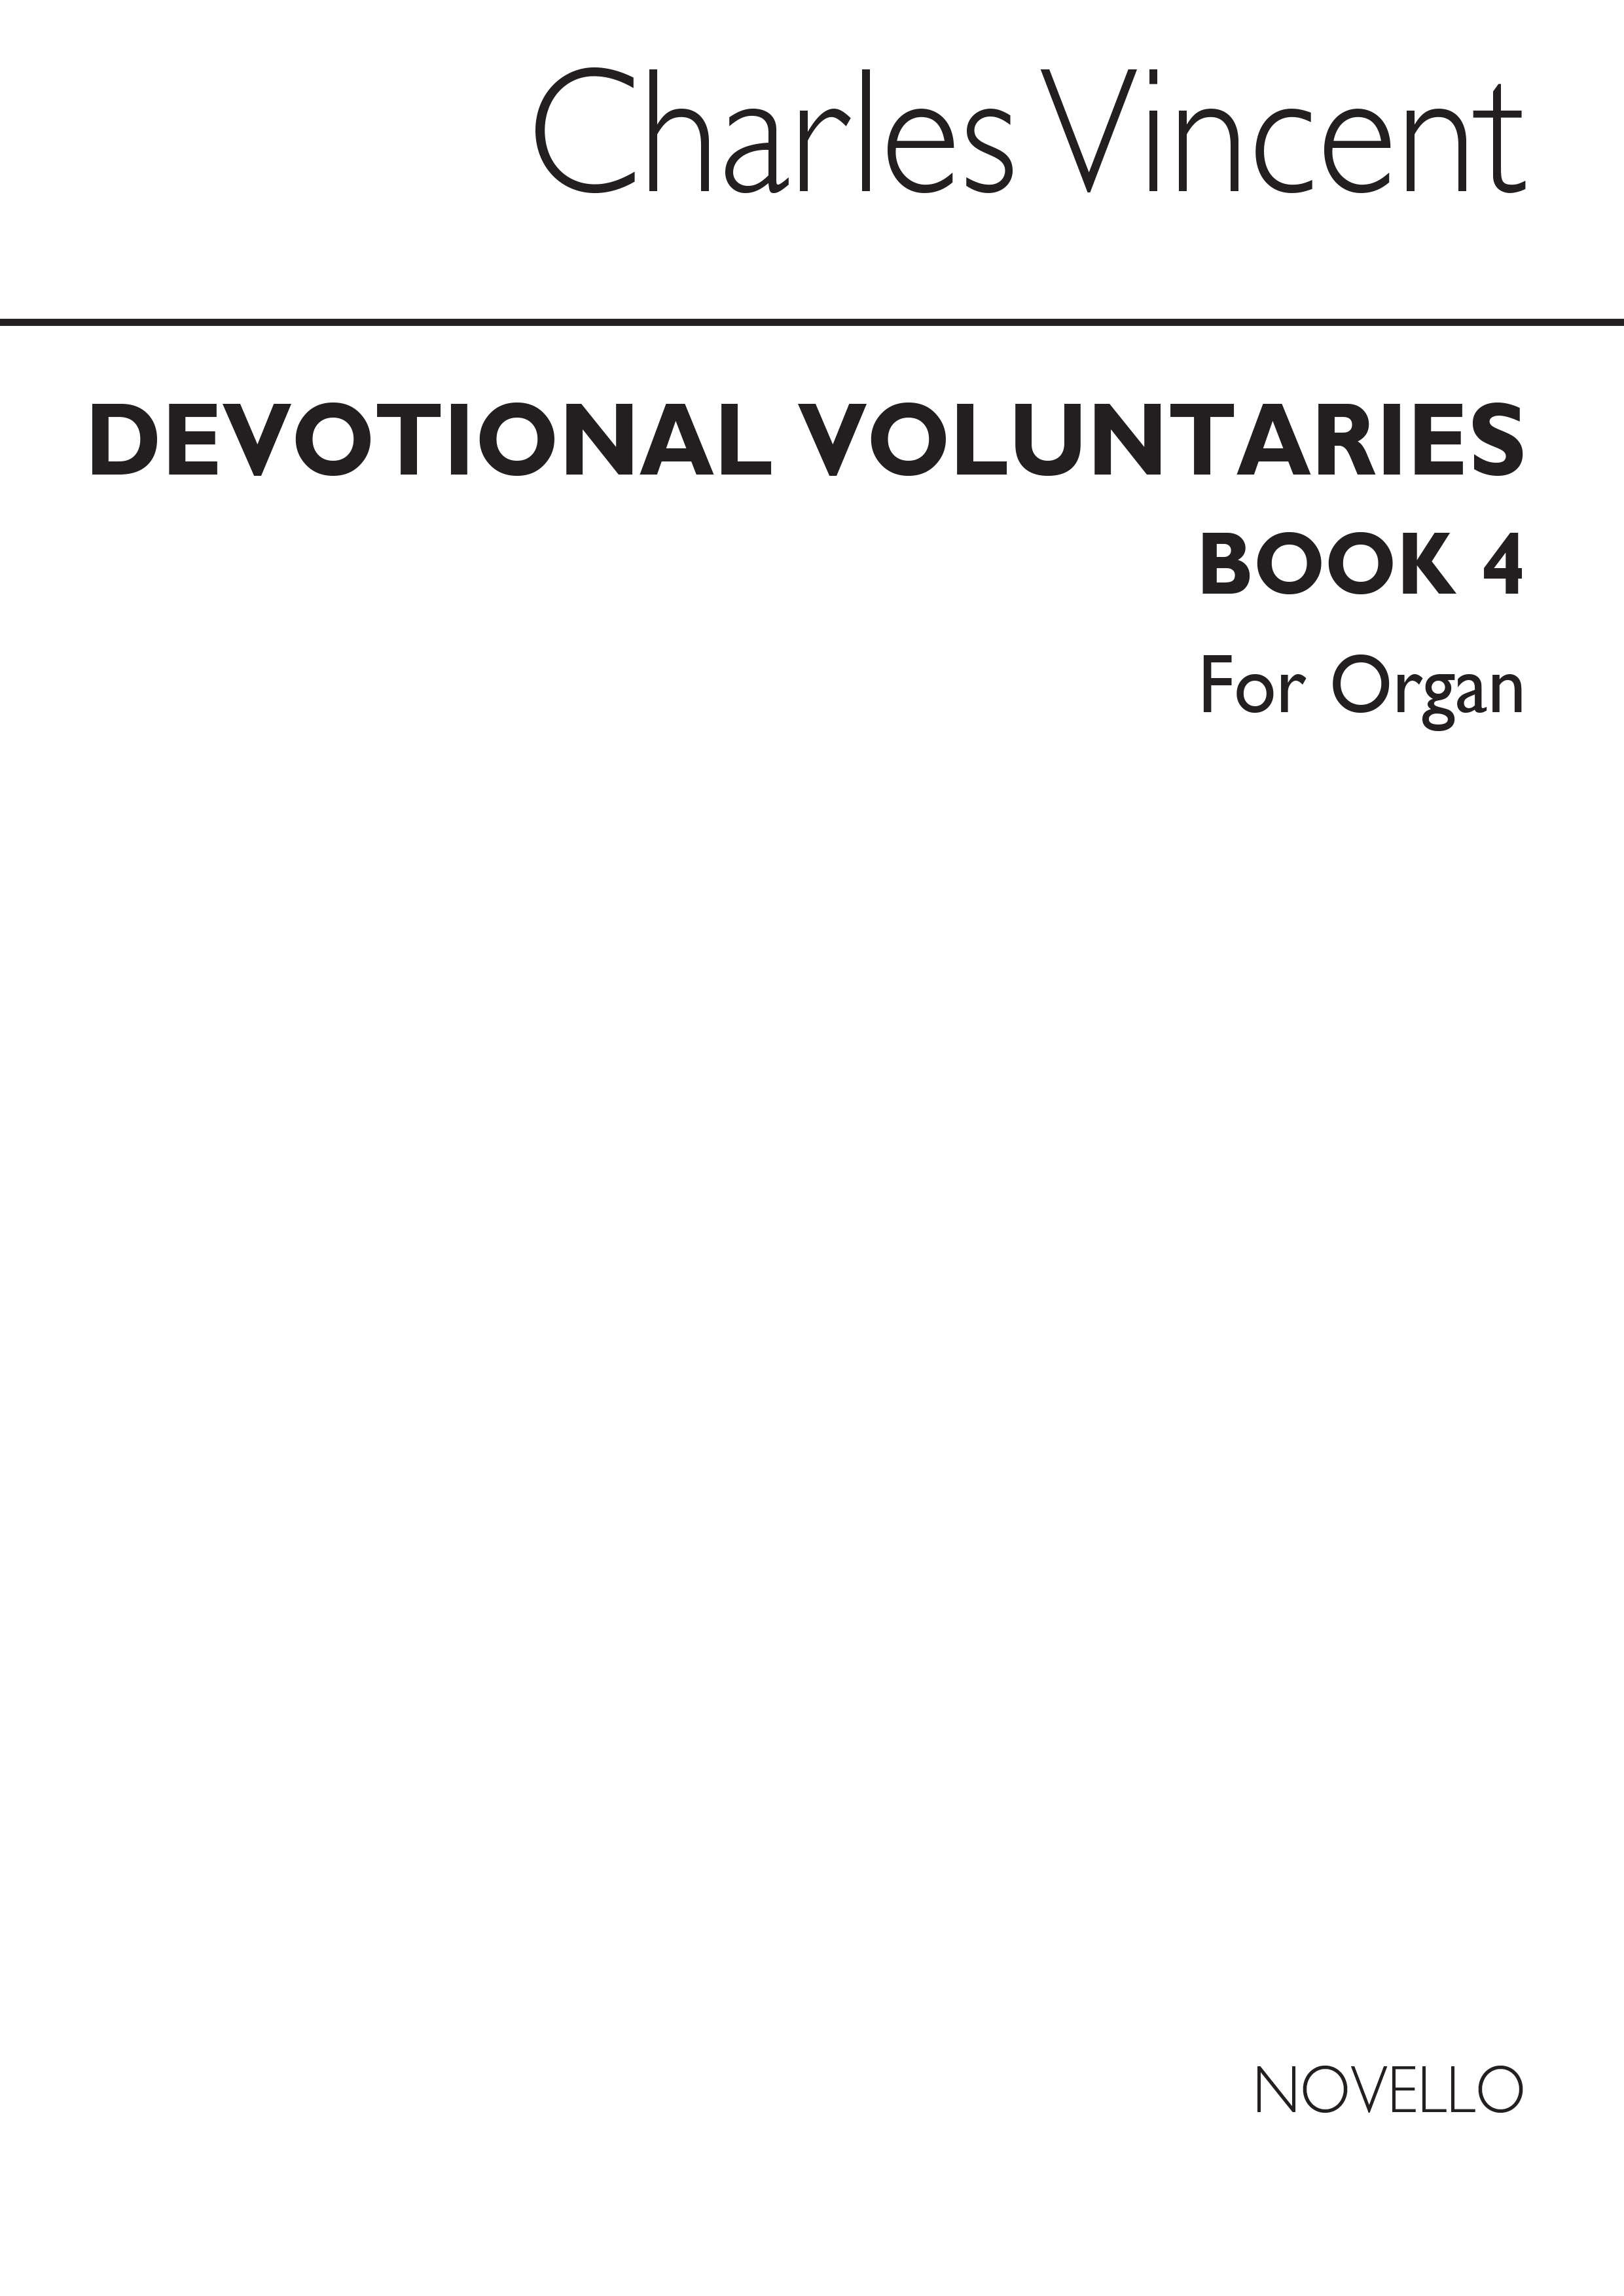 Vincent, C Devotional Voluntaries Book 4 For Organ (Two Stave)